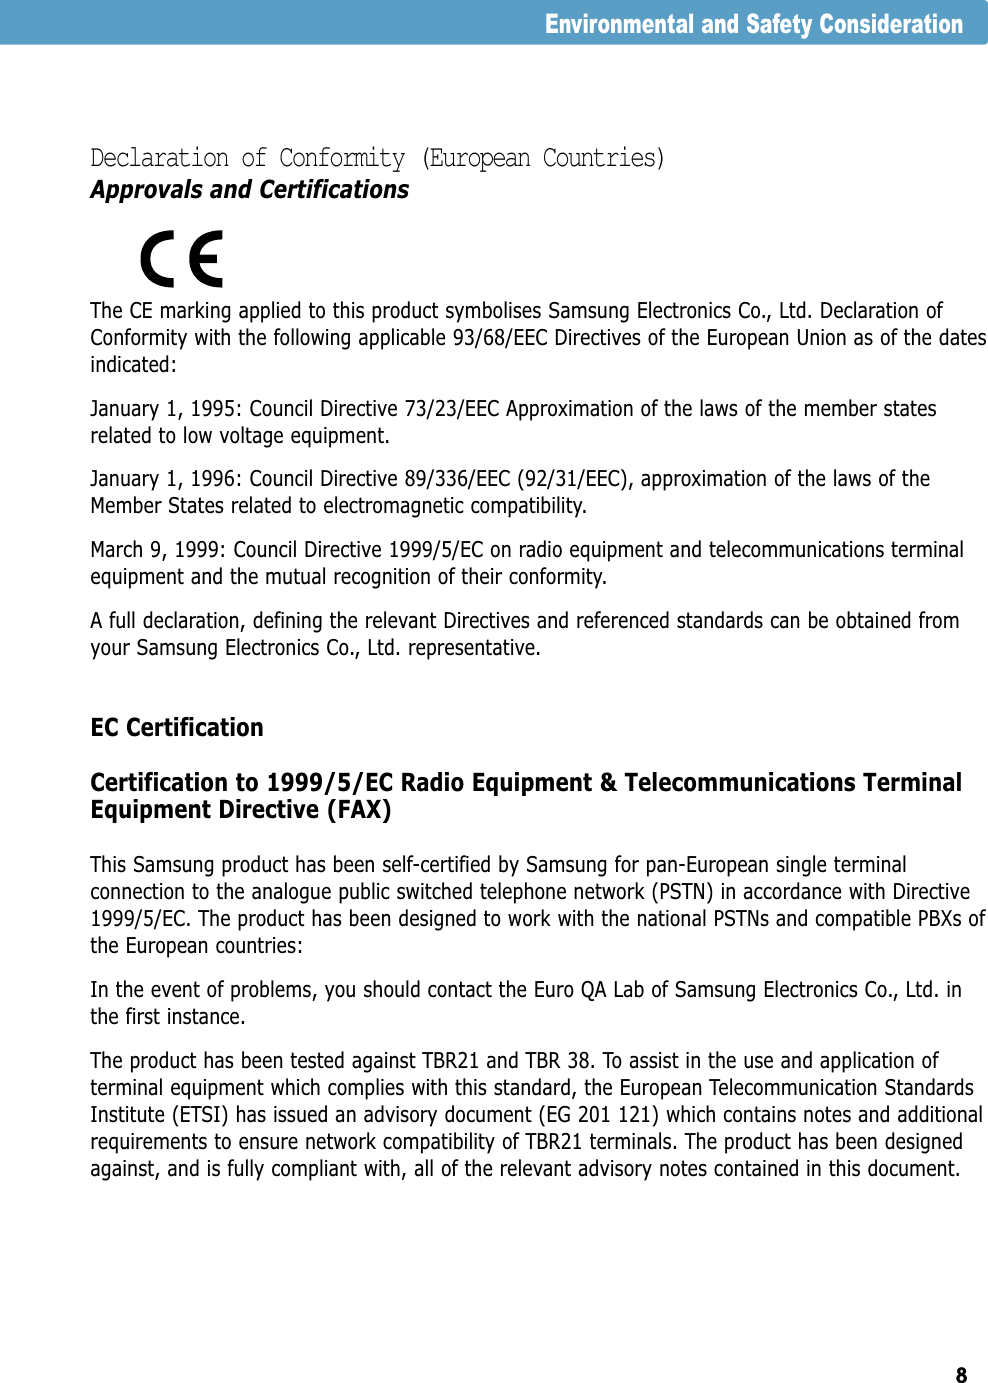 8Declaration of Conformity (European Countries)Approvals and CertificationsThe CE marking applied to this product symbolises Samsung Electronics Co., Ltd. Declaration ofConformity with the following applicable 93/68/EEC Directives of the European Union as of the datesindicated:January 1, 1995: Council Directive 73/23/EEC Approximation of the laws of the member statesrelated to low voltage equipment.January 1, 1996: Council Directive 89/336/EEC (92/31/EEC), approximation of the laws of theMember States related to electromagnetic compatibility.March 9, 1999: Council Directive 1999/5/EC on radio equipment and telecommunications terminalequipment and the mutual recognition of their conformity.A full declaration, defining the relevant Directives and referenced standards can be obtained fromyour Samsung Electronics Co., Ltd. representative.EC CertificationCertification to 1999/5/EC Radio Equipment &amp; Telecommunications TerminalEquipment Directive (FAX)This Samsung product has been self-certified by Samsung for pan-European single terminalconnection to the analogue public switched telephone network (PSTN) in accordance with Directive1999/5/EC. The product has been designed to work with the national PSTNs and compatible PBXs ofthe European countries:In the event of problems, you should contact the Euro QA Lab of Samsung Electronics Co., Ltd. inthe first instance.The product has been tested against TBR21 and TBR 38. To assist in the use and application ofterminal equipment which complies with this standard, the European Telecommunication StandardsInstitute (ETSI) has issued an advisory document (EG 201 121) which contains notes and additionalrequirements to ensure network compatibility of TBR21 terminals. The product has been designedagainst, and is fully compliant with, all of the relevant advisory notes contained in this document.Environmental and Safety Consideration